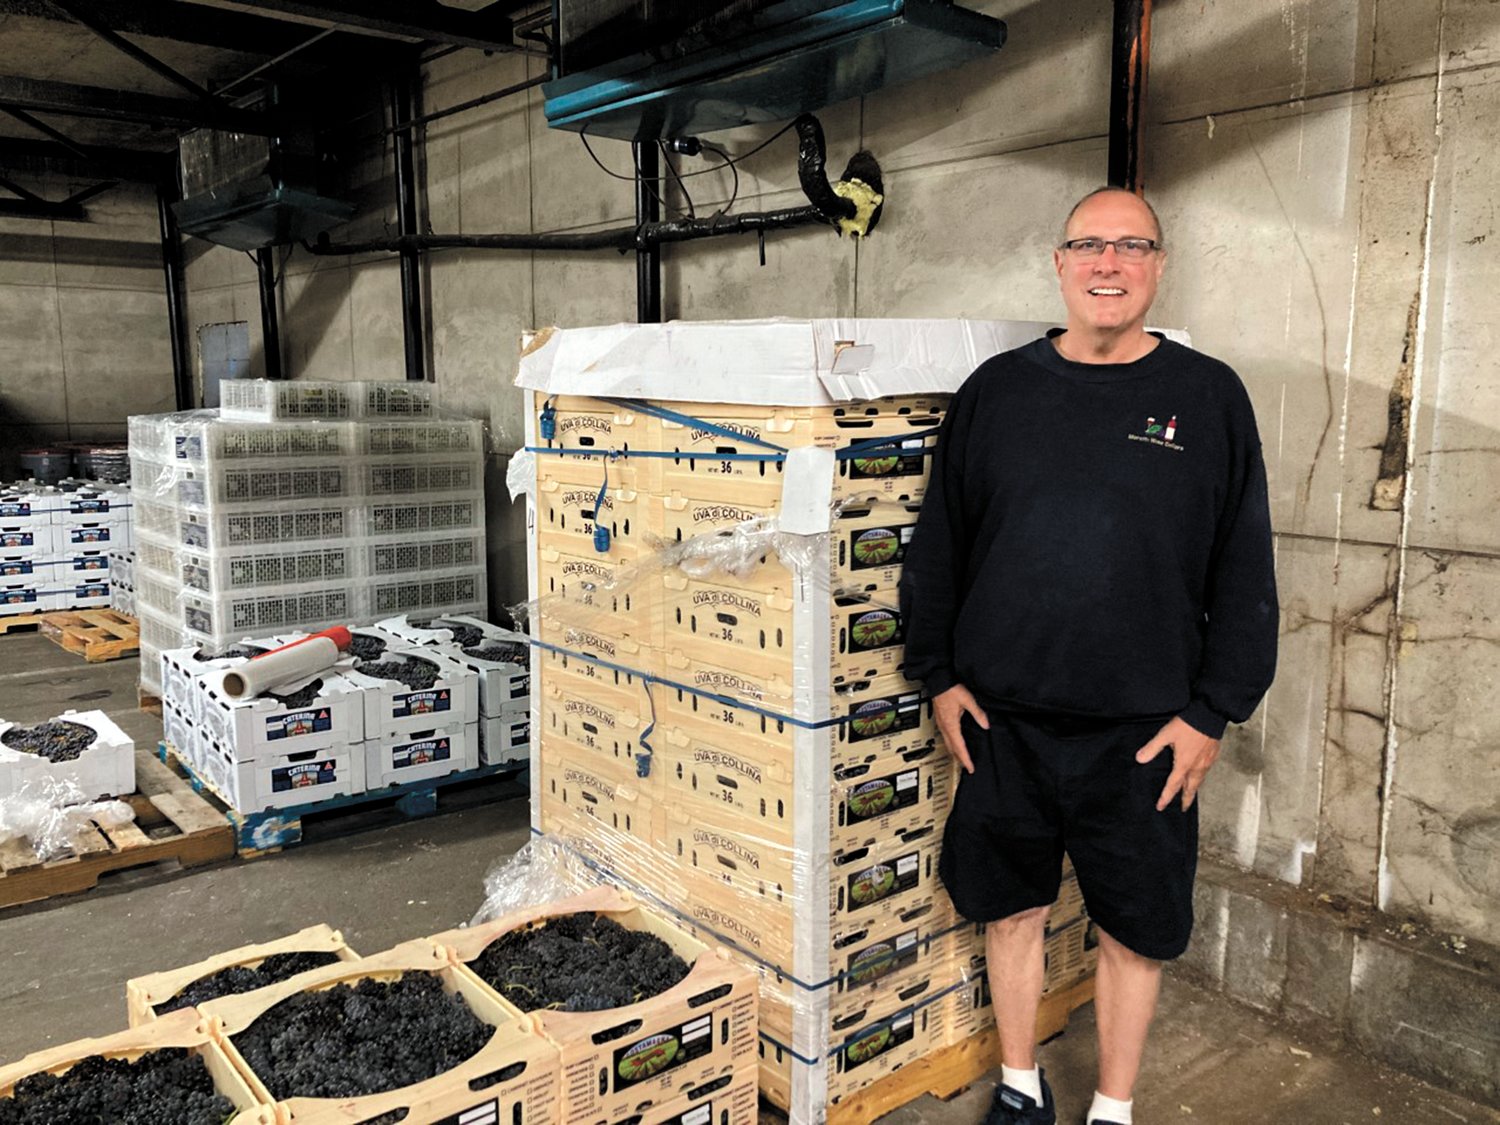 LEARNING TO MAKE WINE AT AGE 10: Anthony Moretti learned to make wine at age 10 from his neighbor George Solitro and started making his own wine at 13. He now imports grapes from California and crushes and presses them into grape juice to sell to customers who produce their own wine.